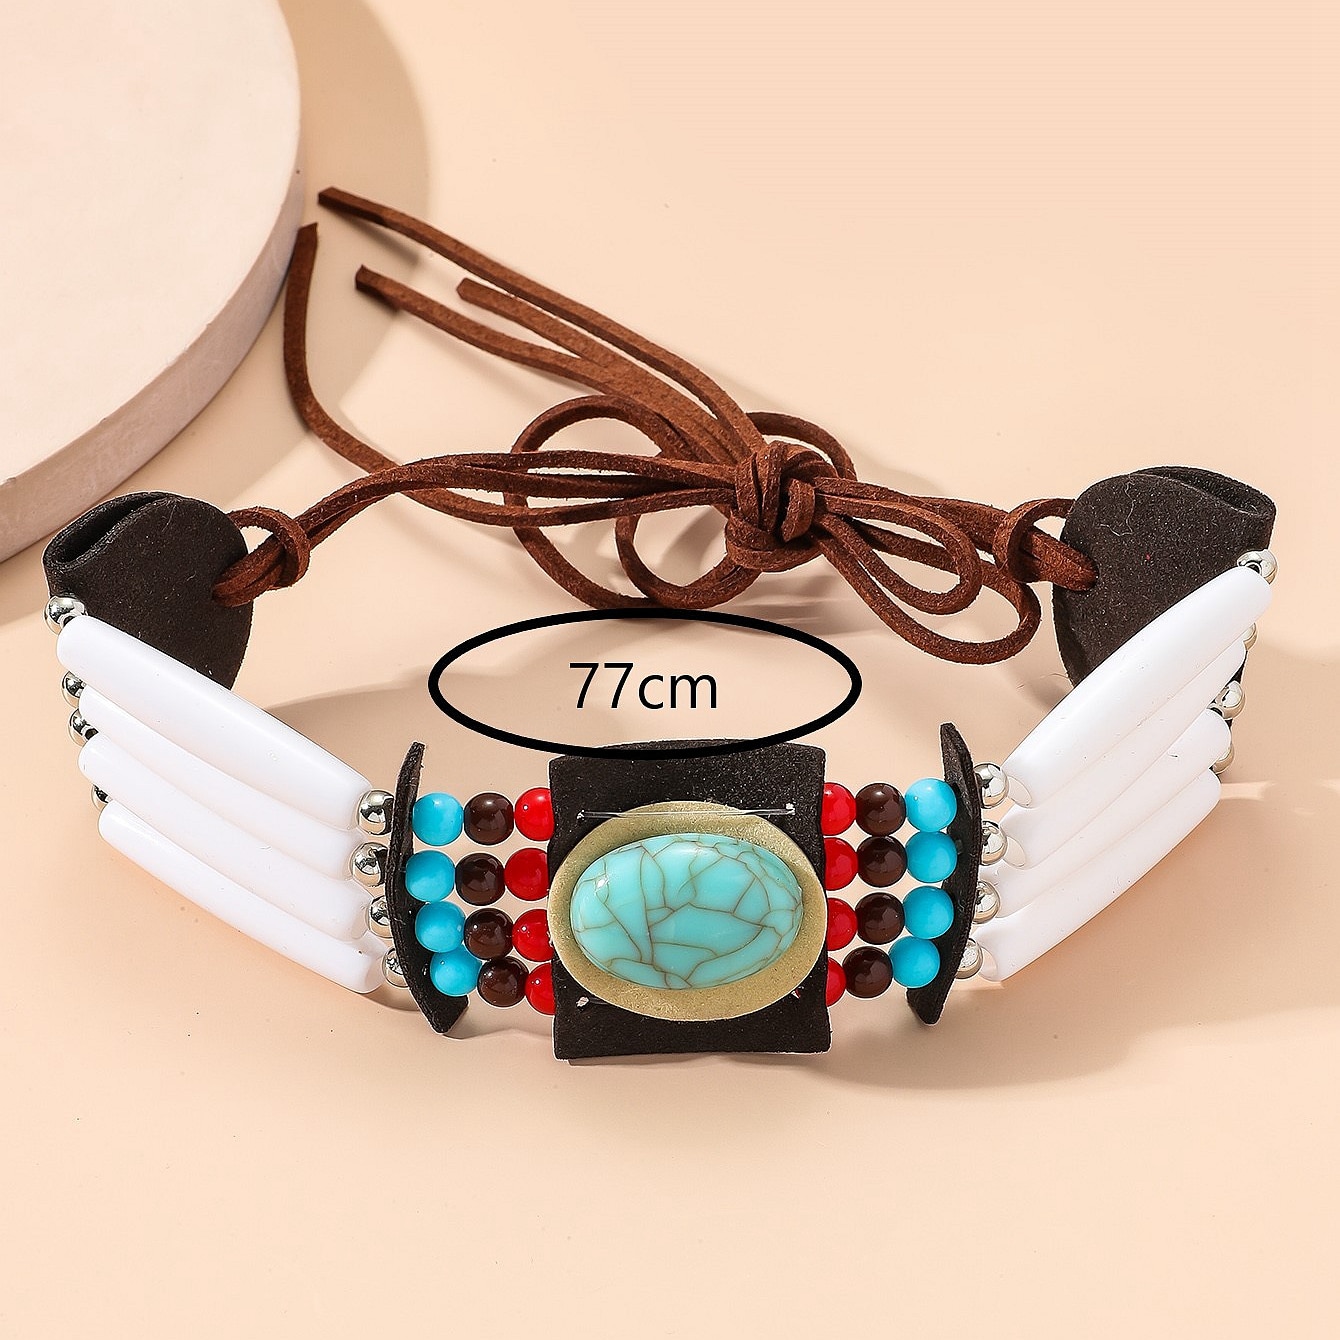 Ethnic-Gypsy-Boho-Necklace-For-Women-Collares-Statement-Jewelry-Turquoises-Indian-Necklaces-Pendants-1005004340796350-5